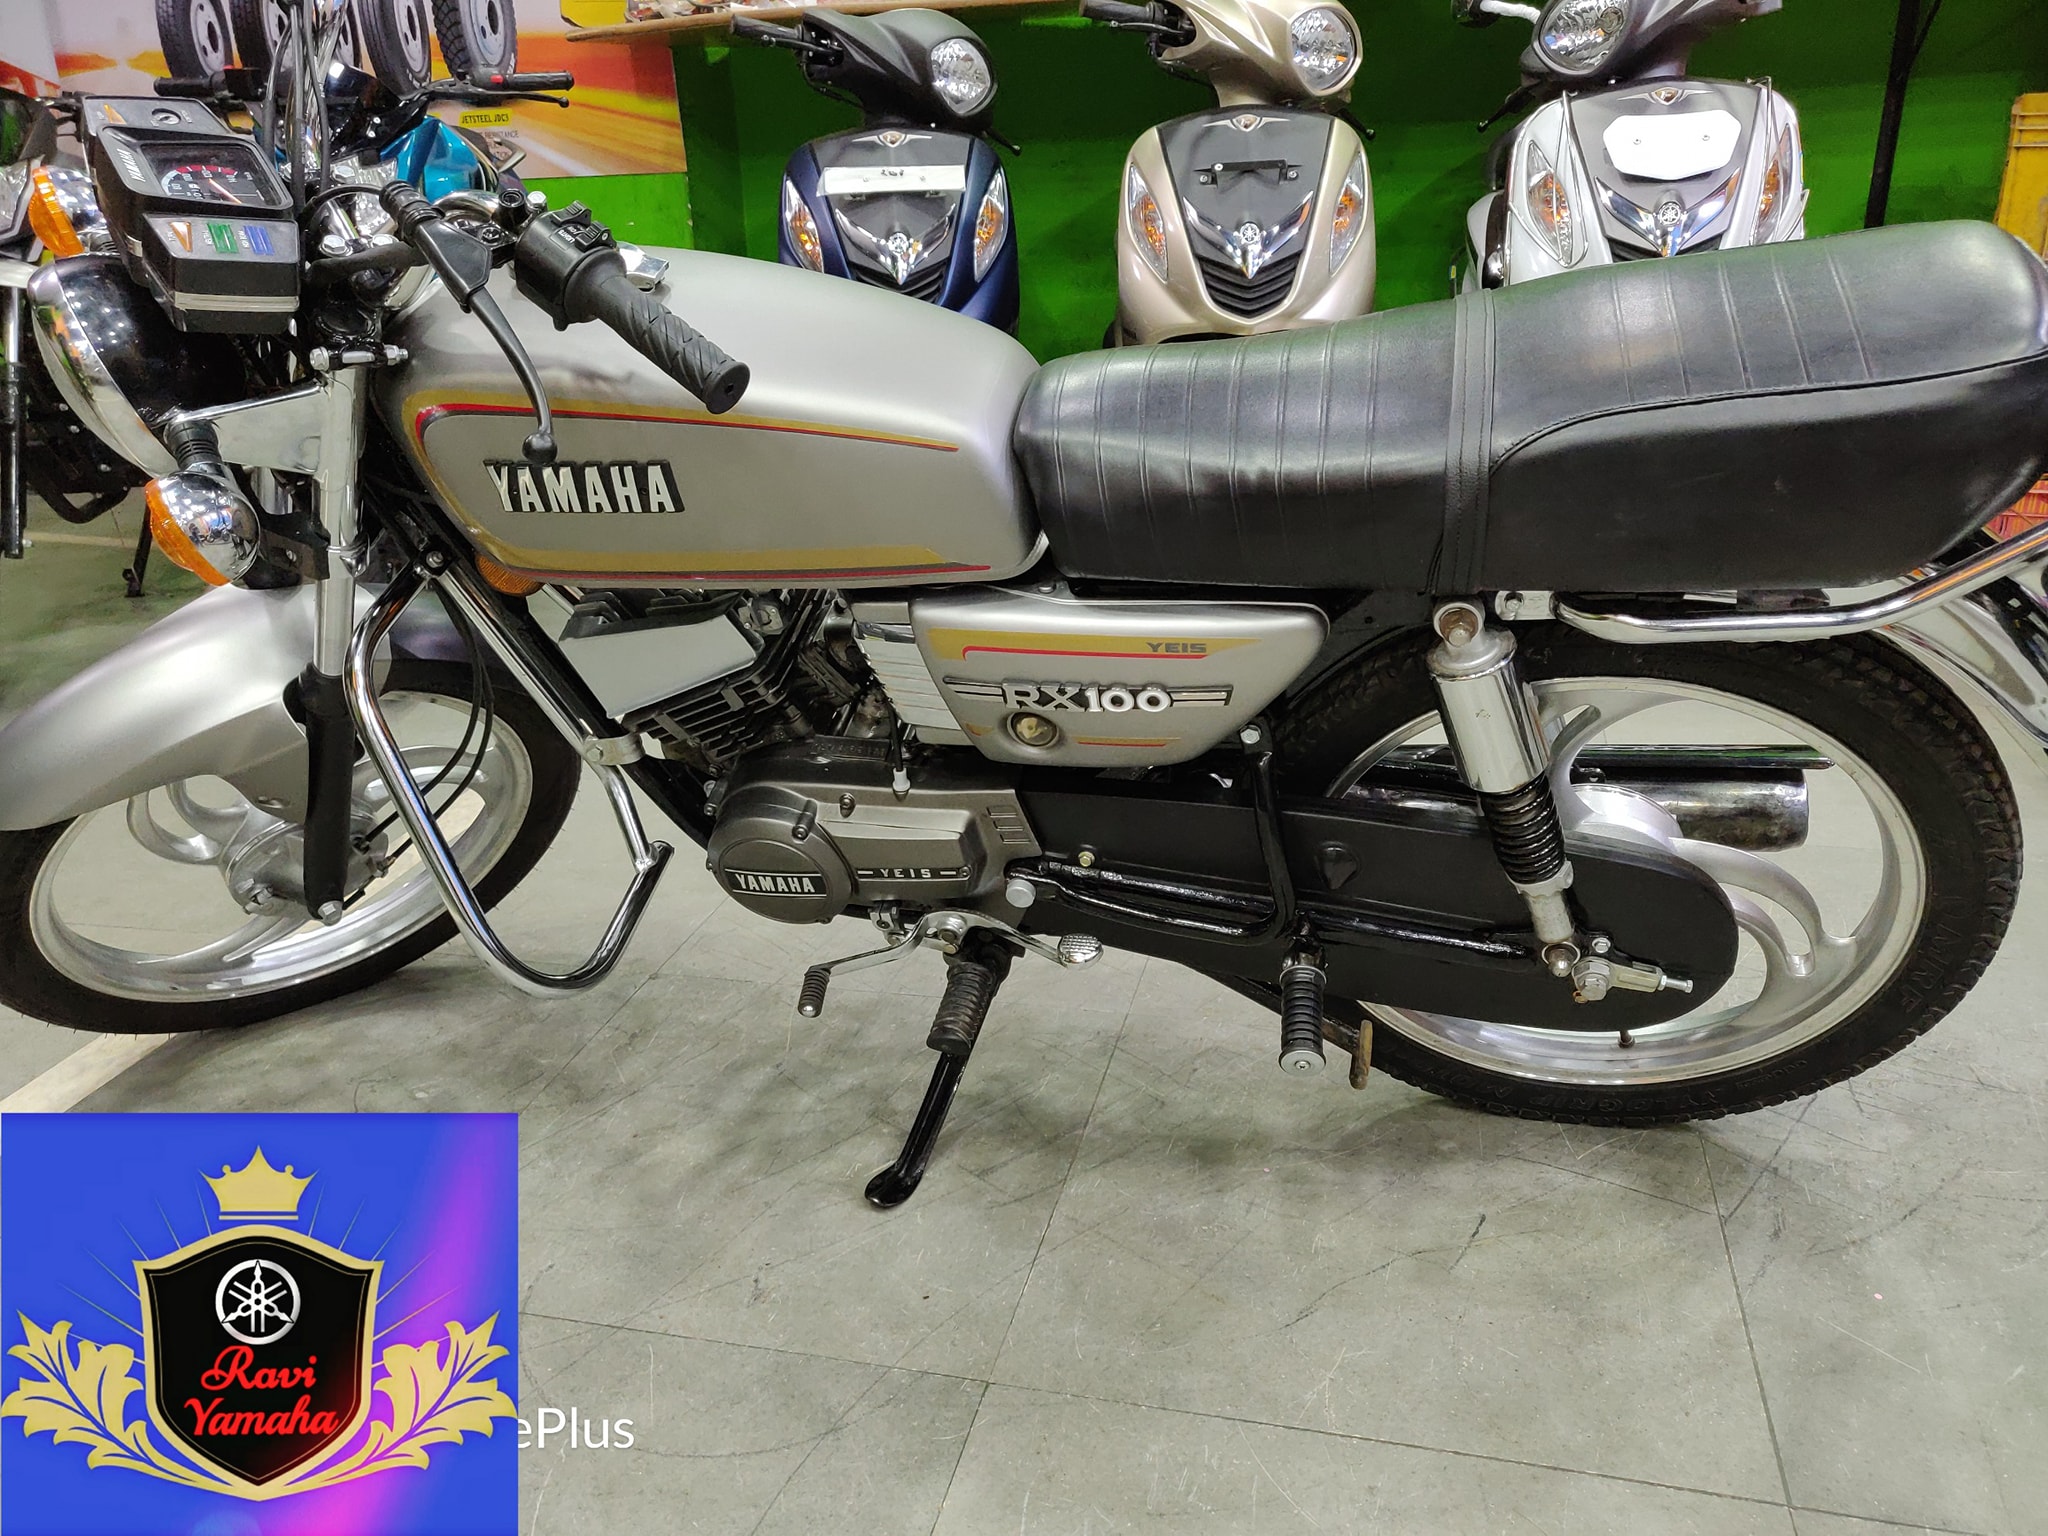 Top 10 Modified Yamaha RX100 Motorcycles in India - Must Check! - midground